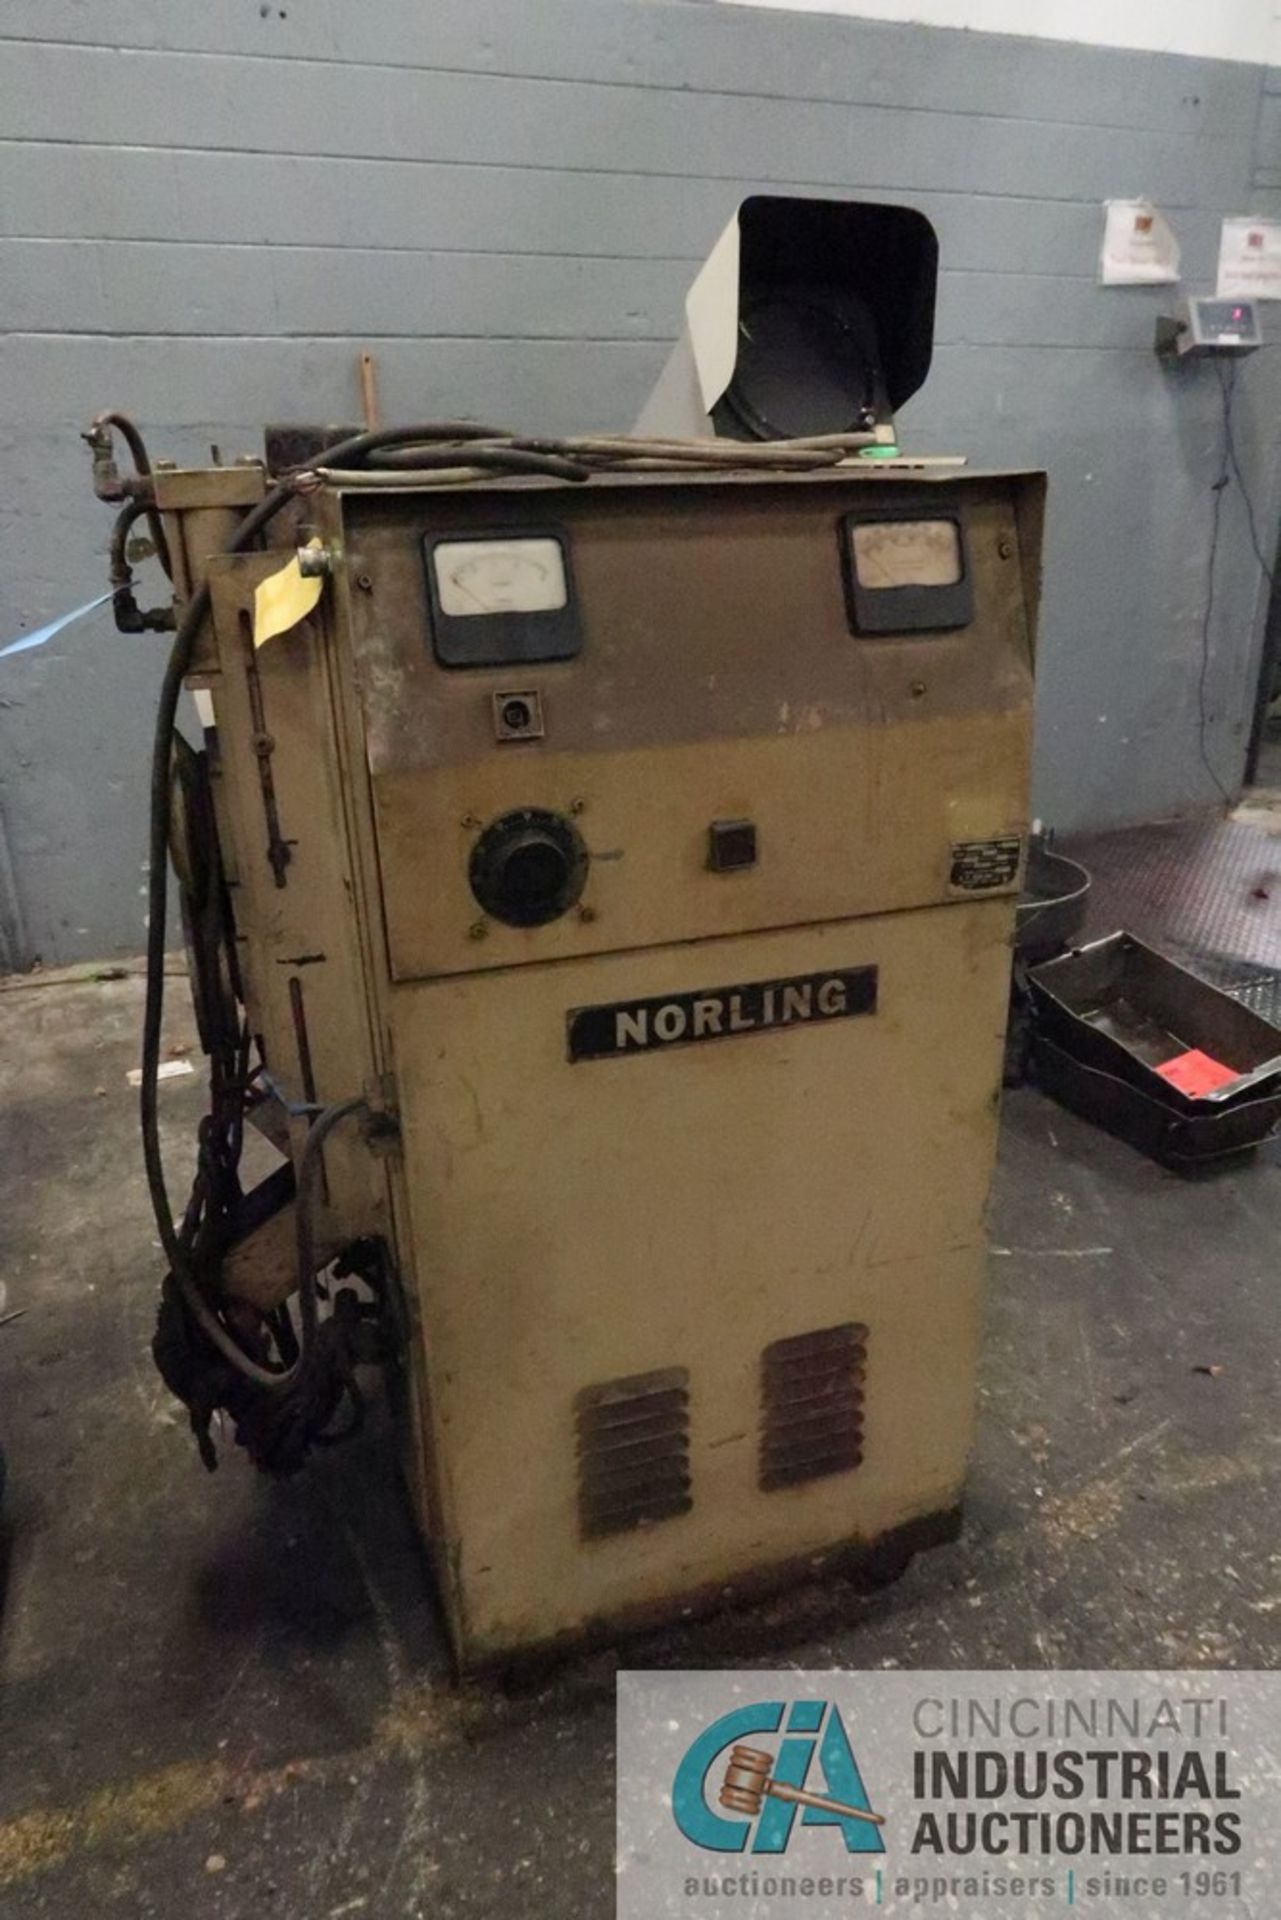 NORLING MODEL 135R5 RESISTANCE WIRE HEATER; S/N 583, 10 KVA, 220 VOLT, .080" - .425" WIRE